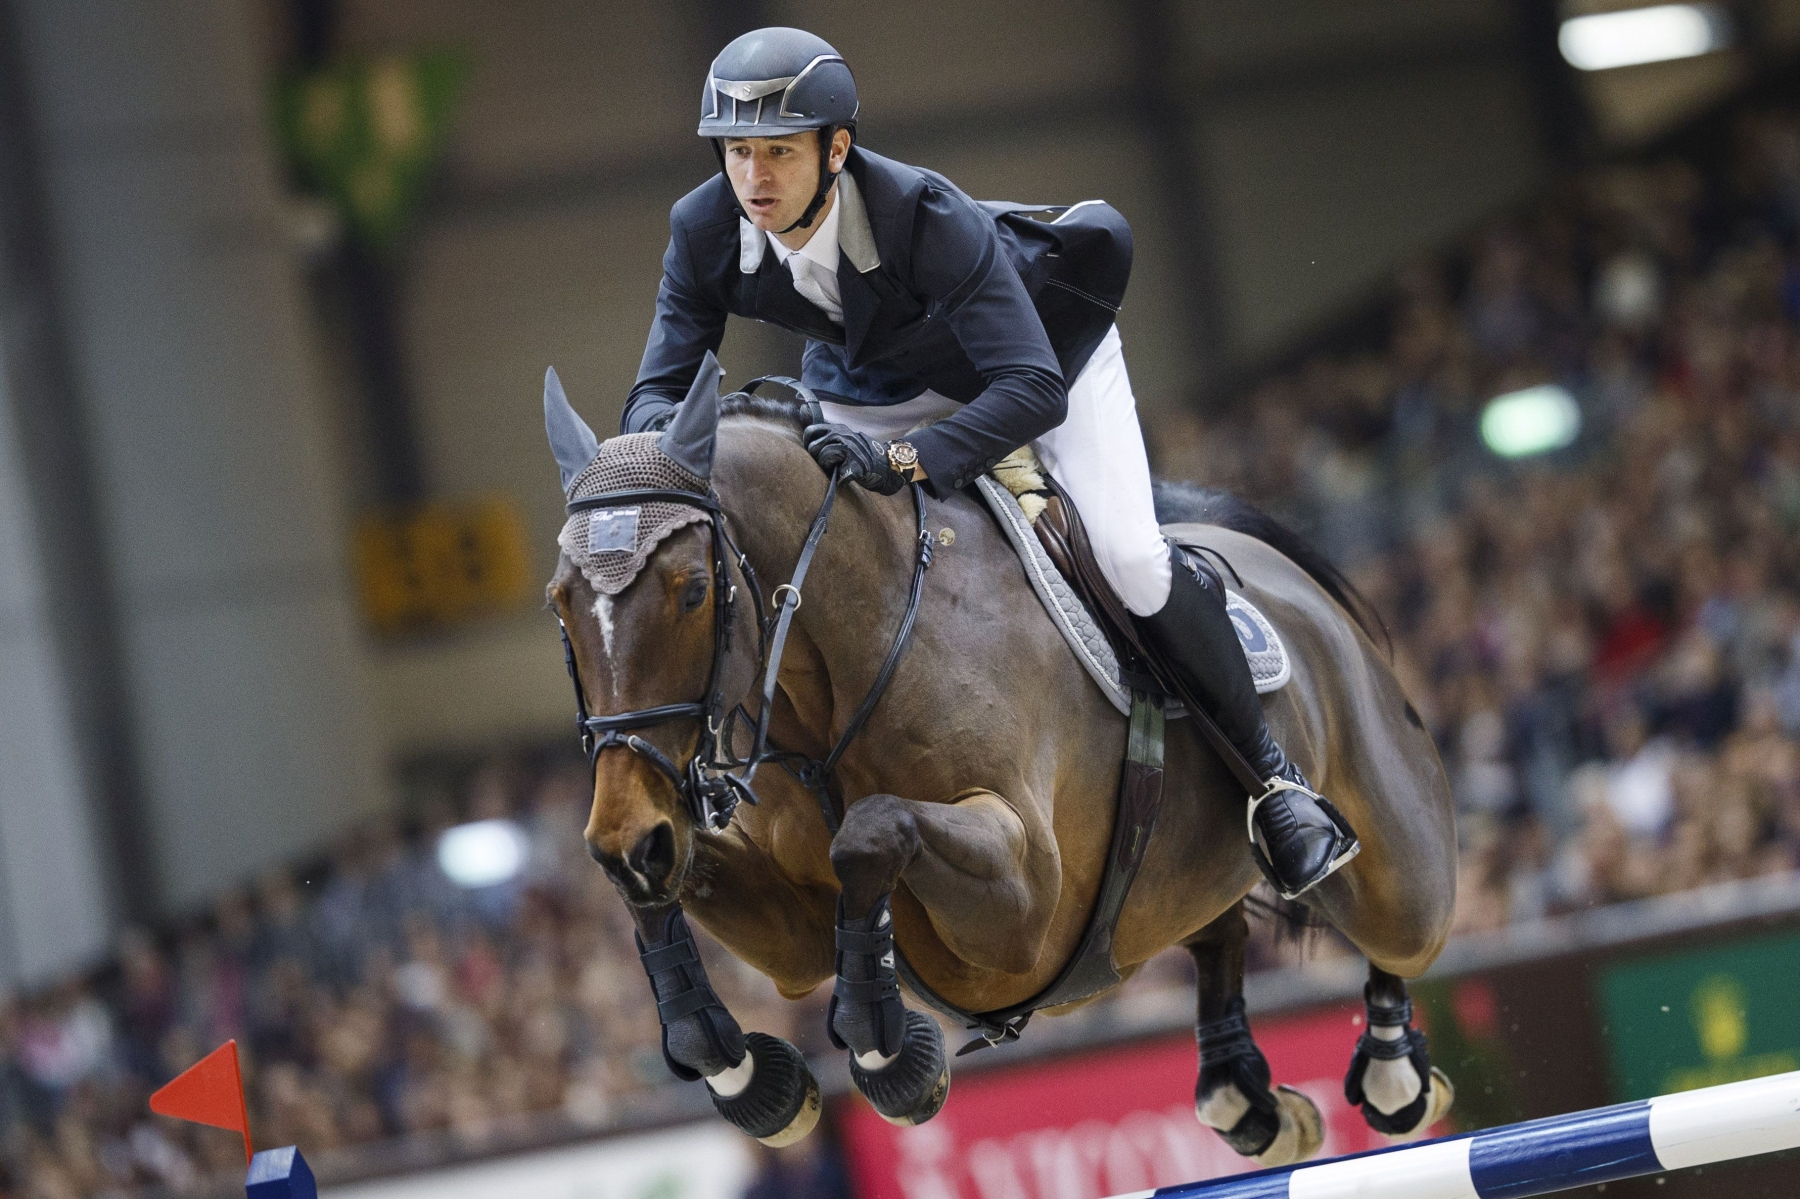 Steve Guerdat from Switzerland rides his horse Nino des Buissonnets to win the first place of the Rolex Grand Prix of show jumping at the 55th CHI international horse show jumping tournament in Geneva, Switzerland, on Sunday, December 13, 2015. (KEYSTONE/Valentin Flauraud)